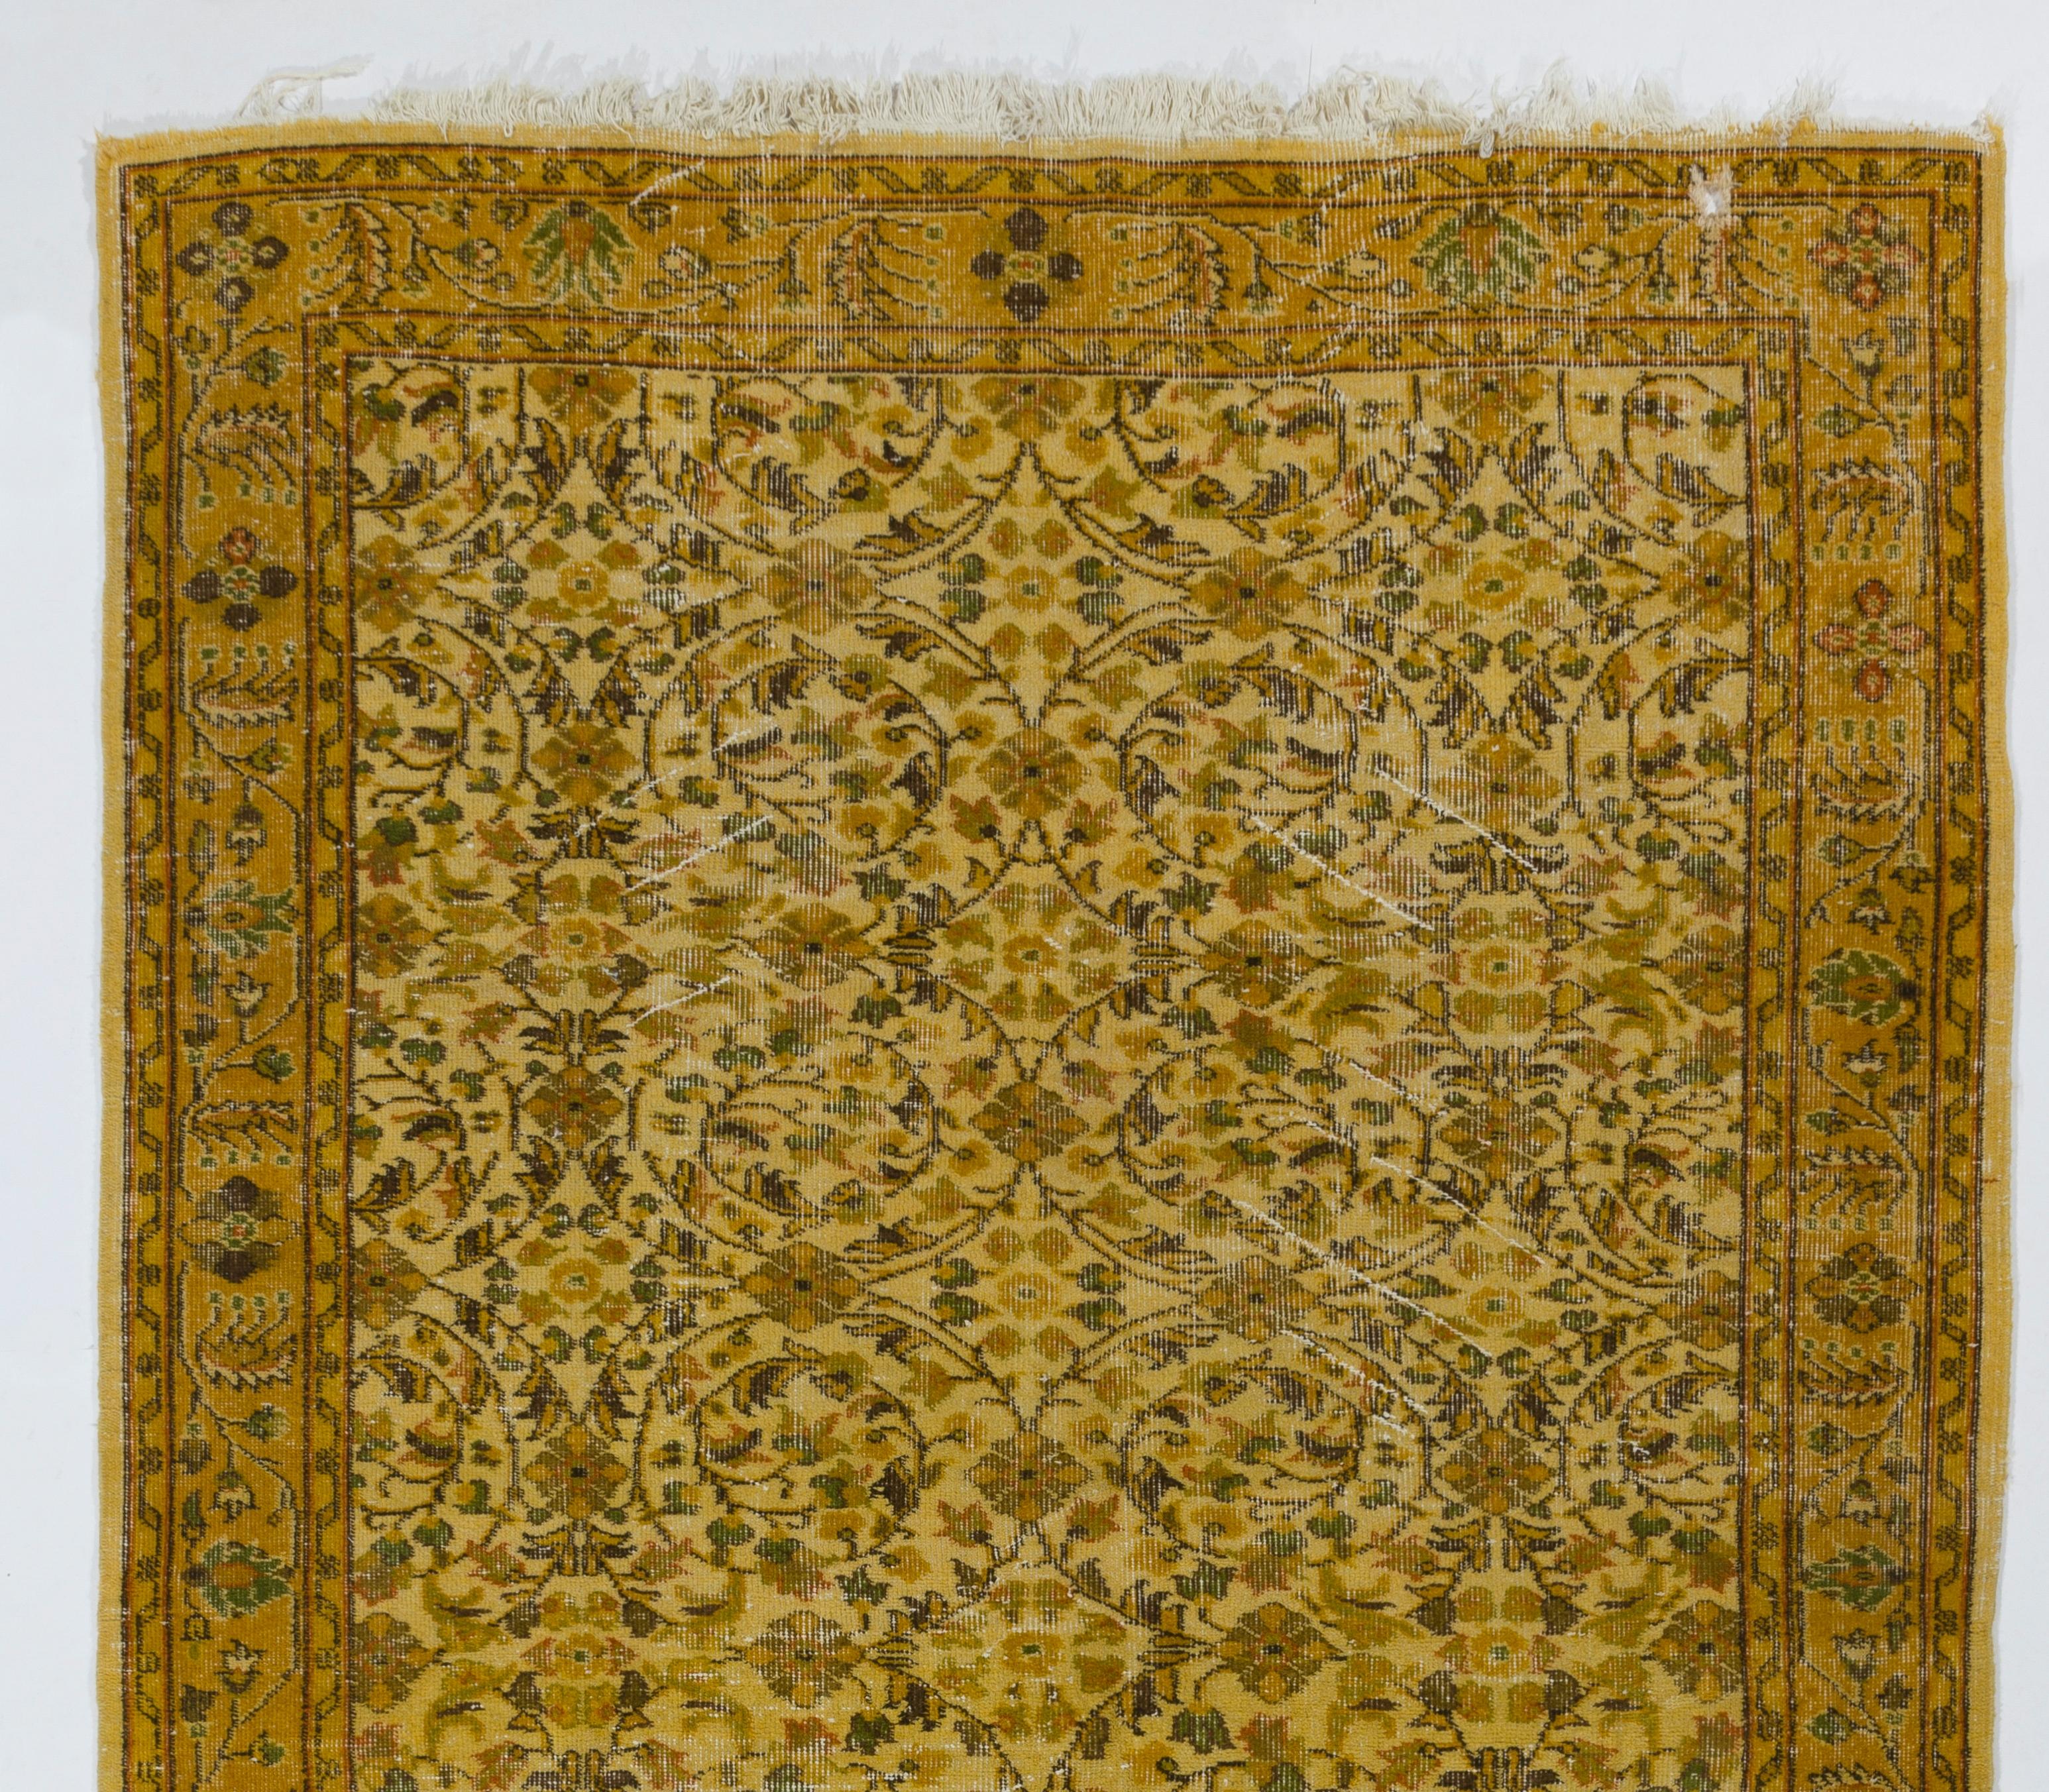 A vintage Turkish area rug over-dyed in yellow color for contemporary interiors.
The rug is finely hand-knotted, has low wool pile on cotton foundation. It is in very good condition, professionally washed, sturdy and suitable for areas with high